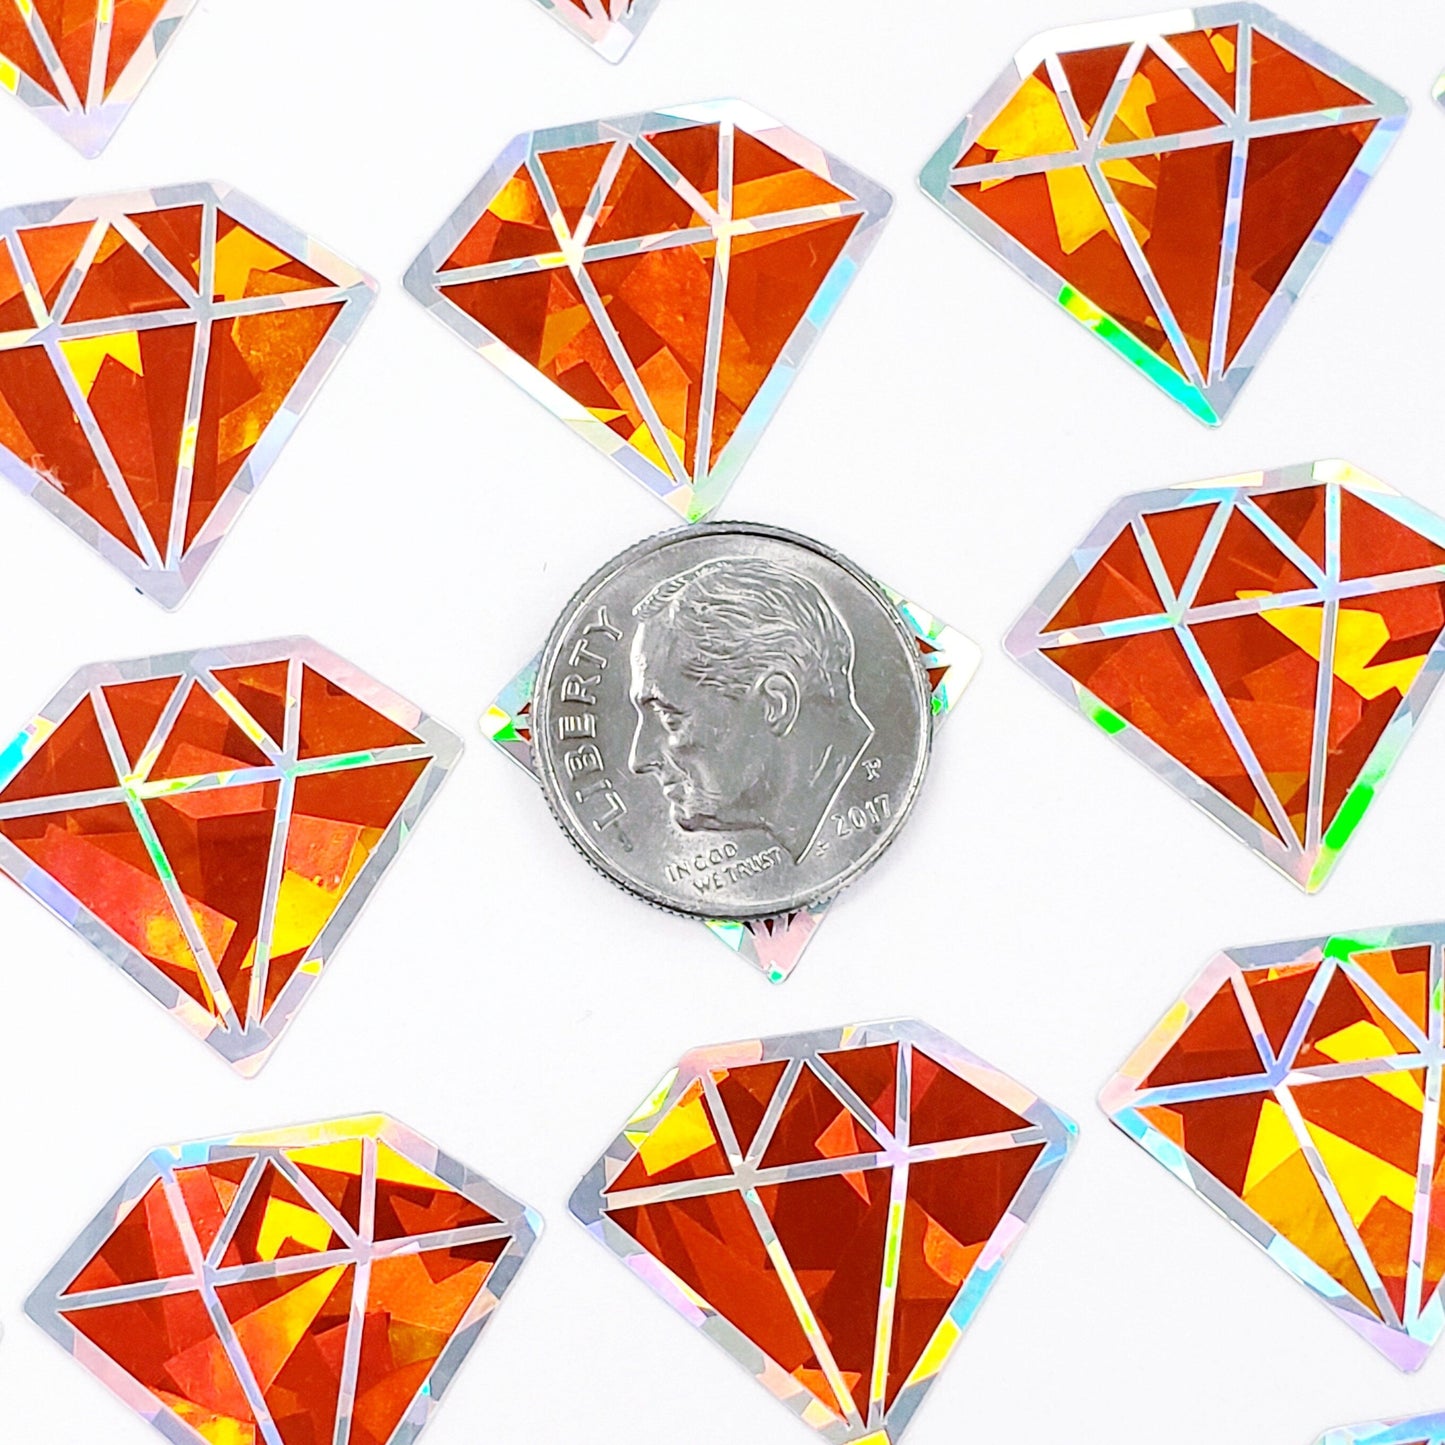 November Birthstone stickers, set of 40 small sparkly orange gemstone decals for gifts, notecards, journals and scrapbook embellishments.